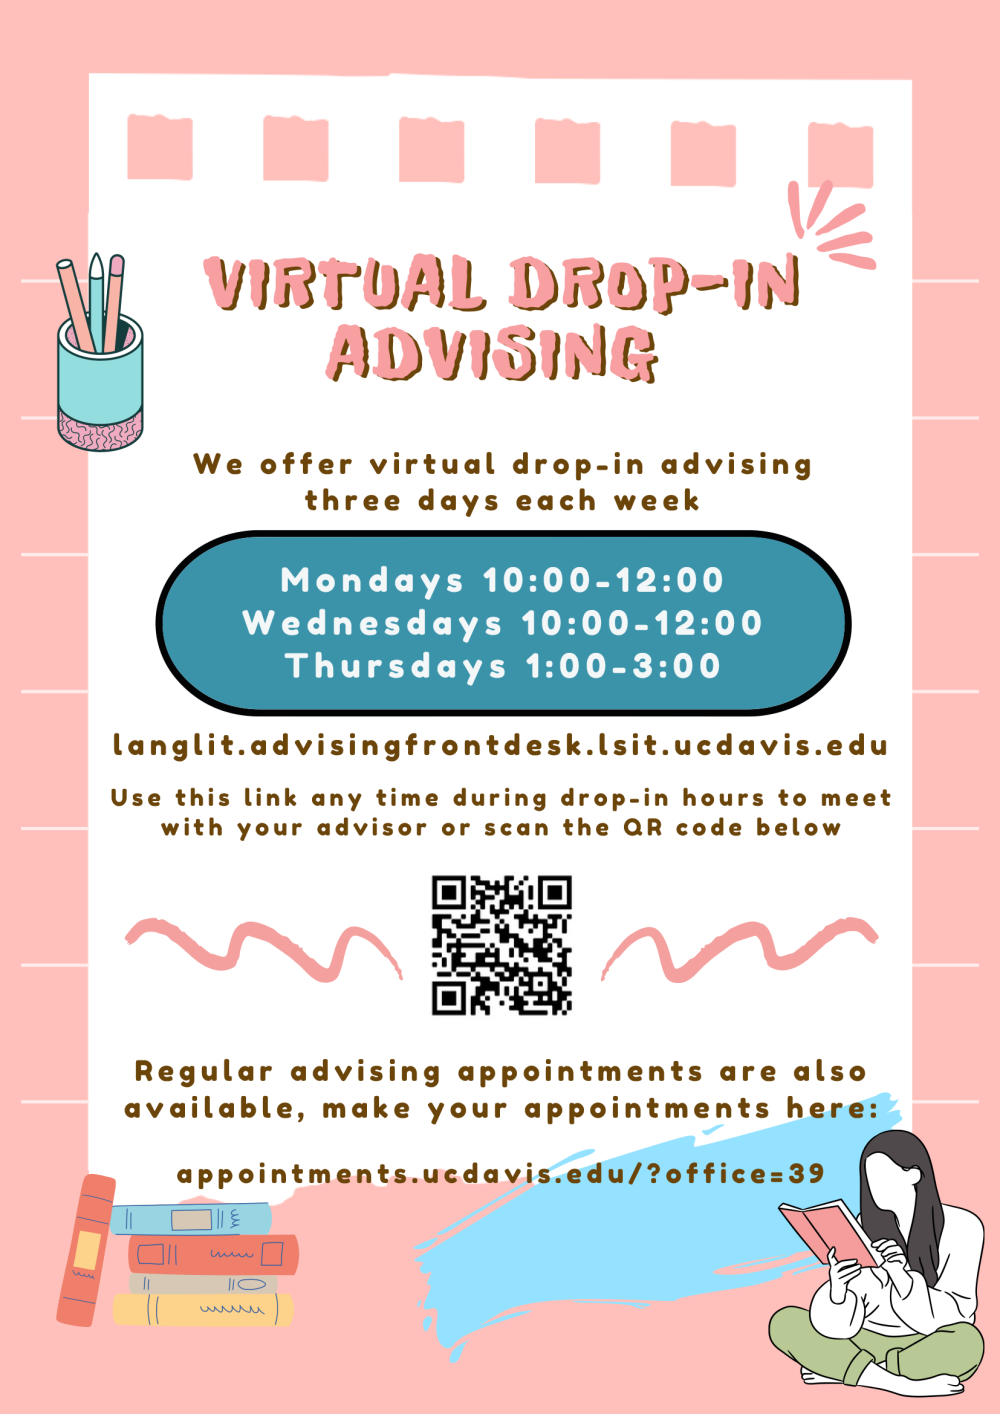  a flyer for virtual advising